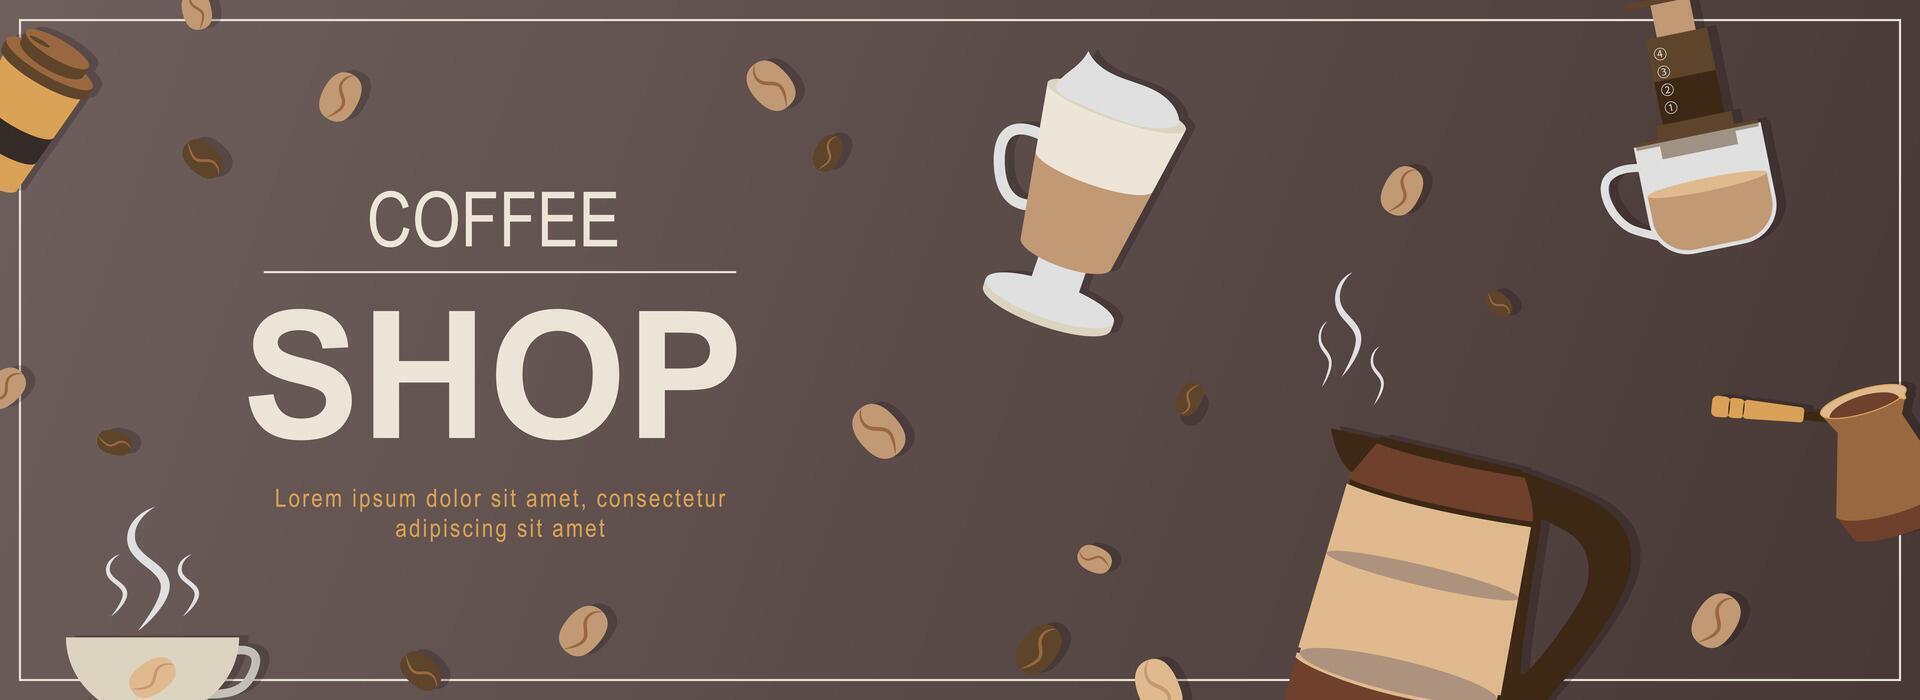 Coffee shop horizontal web banner. Beverage cups, beans, cezve, espresso, cappuccino, latte and other hot drinks in mugs. Vector illustration for header website, cover templates in modern design